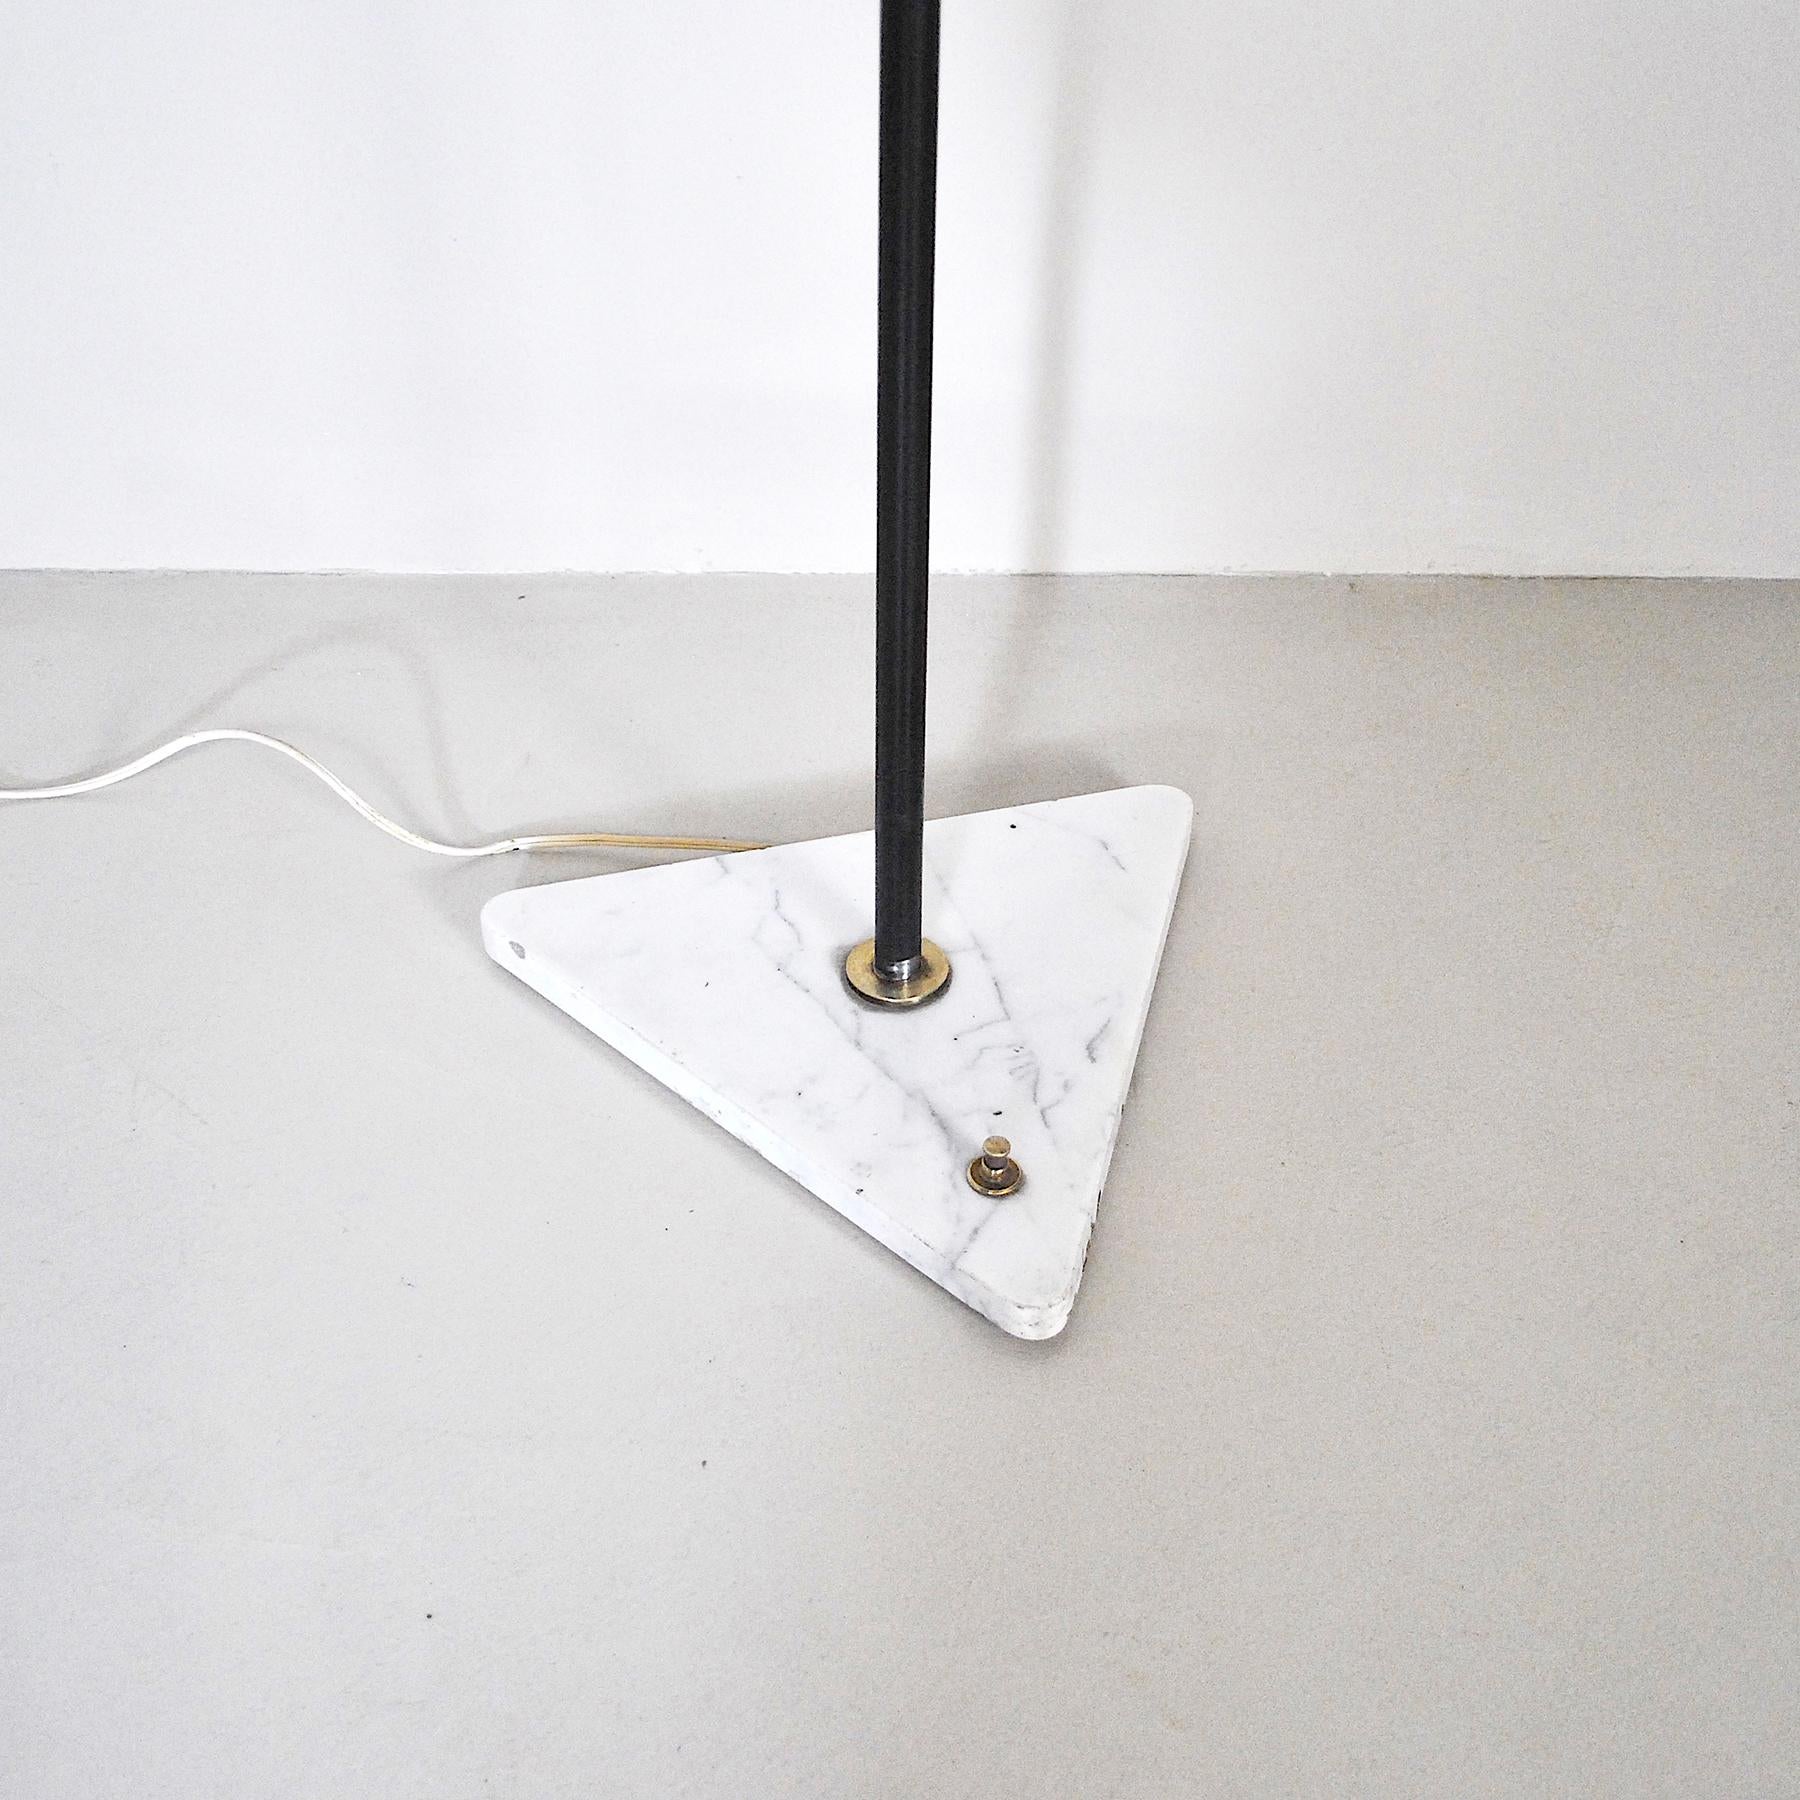 Stilnovo Italian Midcentury Floor Lamp in Brass and Opaline from the 1950s For Sale 1